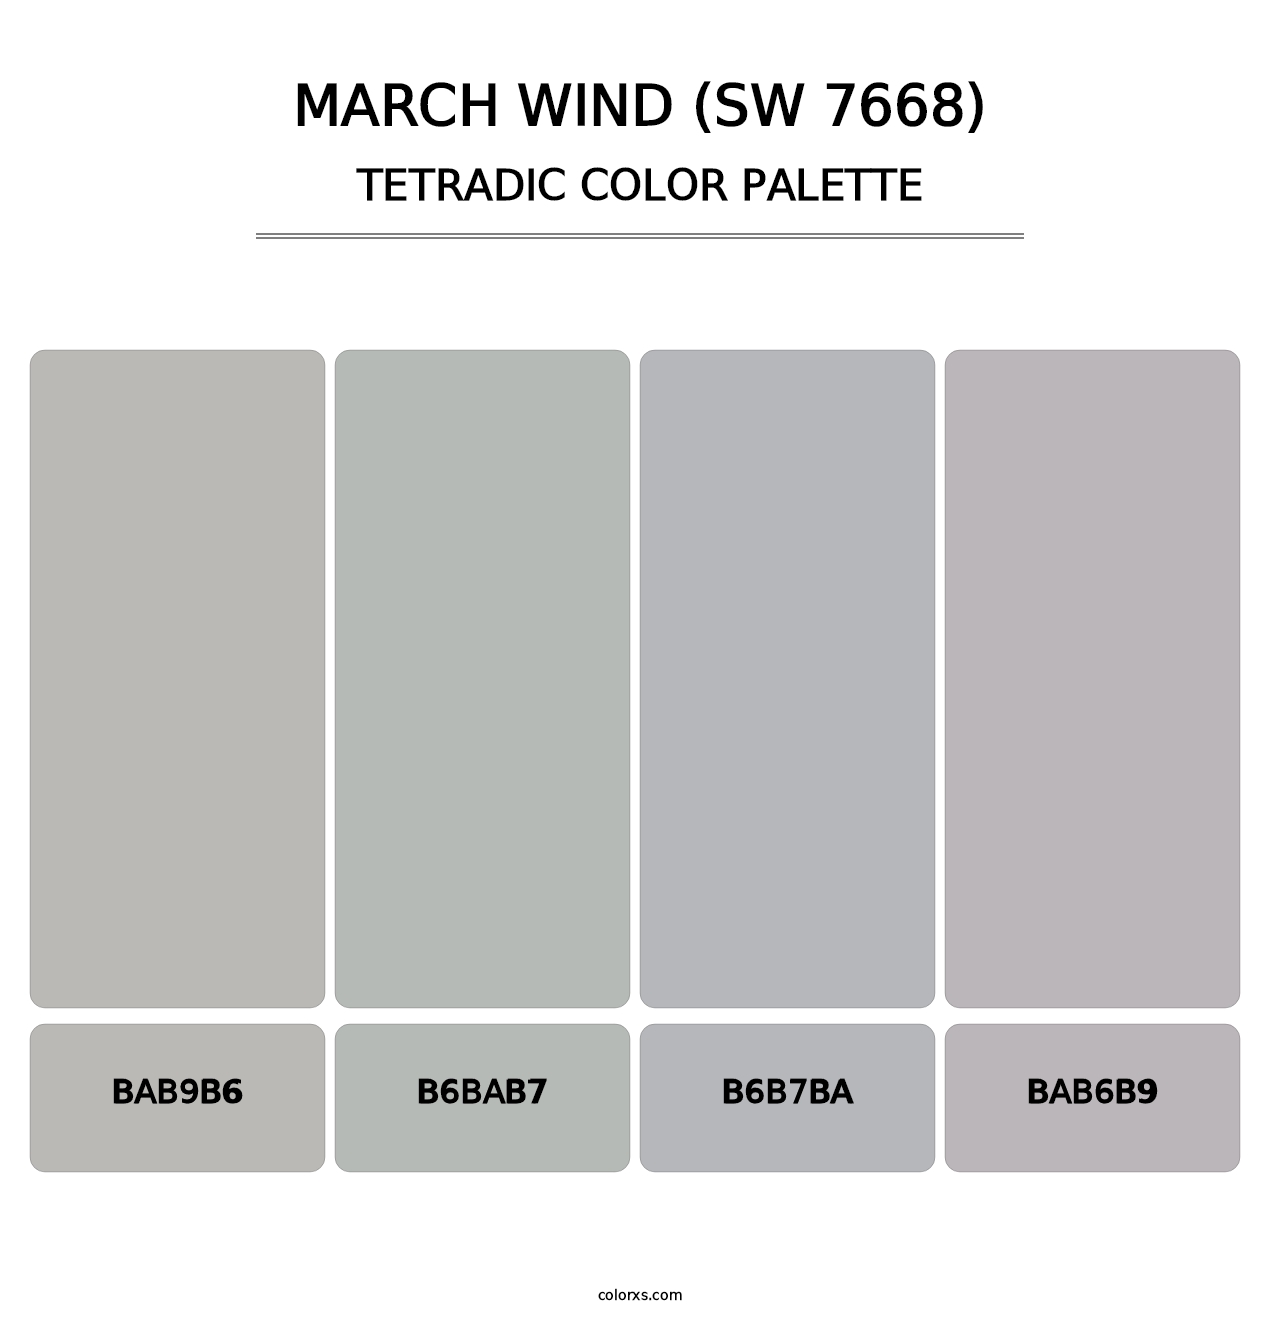 March Wind (SW 7668) - Tetradic Color Palette